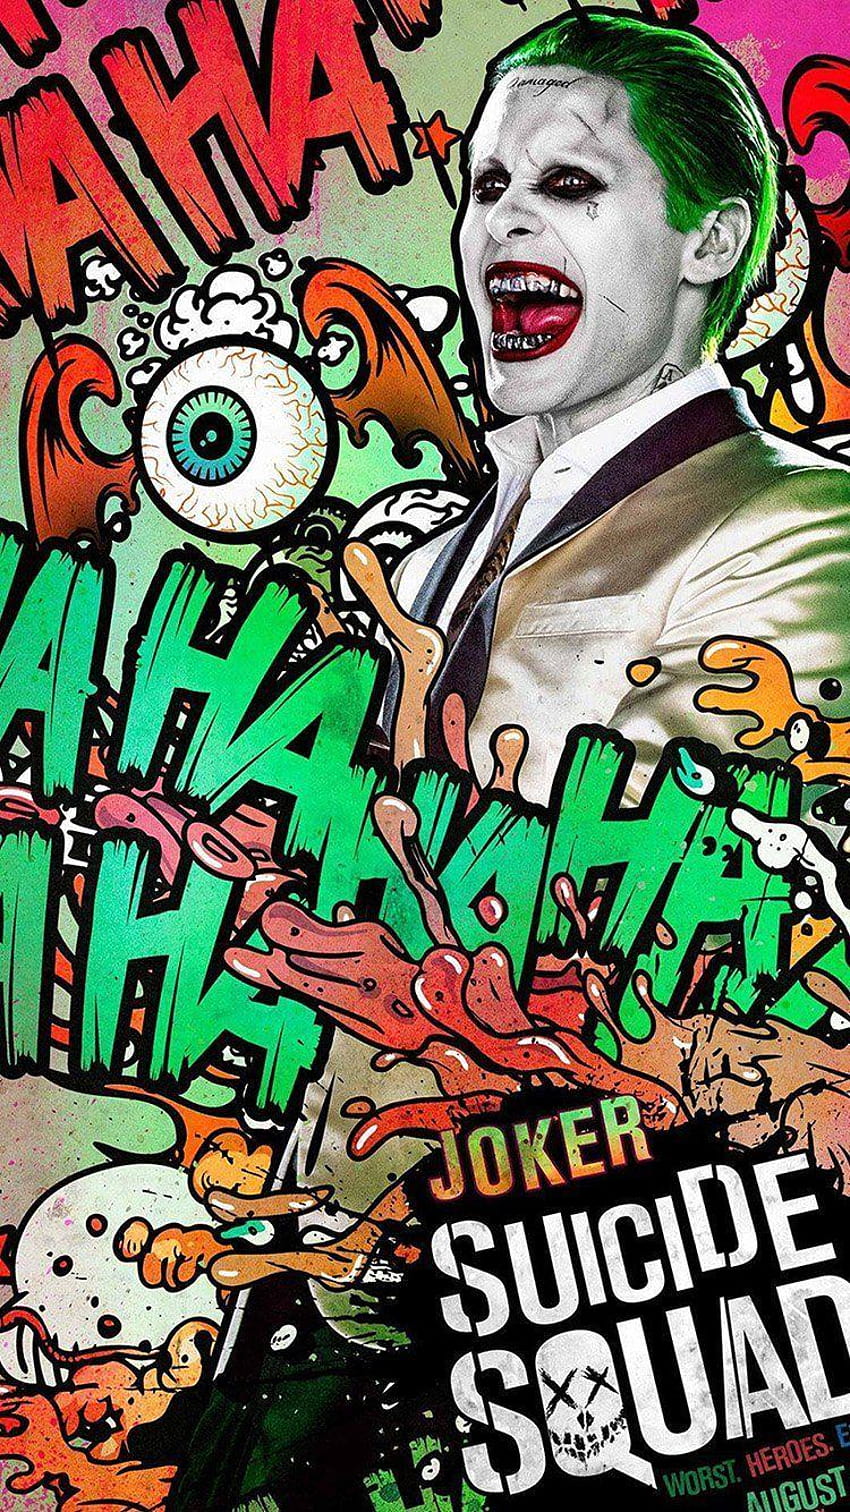 TASROI 5 Sheets Harley Quinn Tattoo Stickers For Women Men Adults Fake Joker  Harley Quinn Tattoos Suicide Squad Birds of Prey Temporary Tattoos  Halloween Face Makeup Harley Quinn Costume Accessories